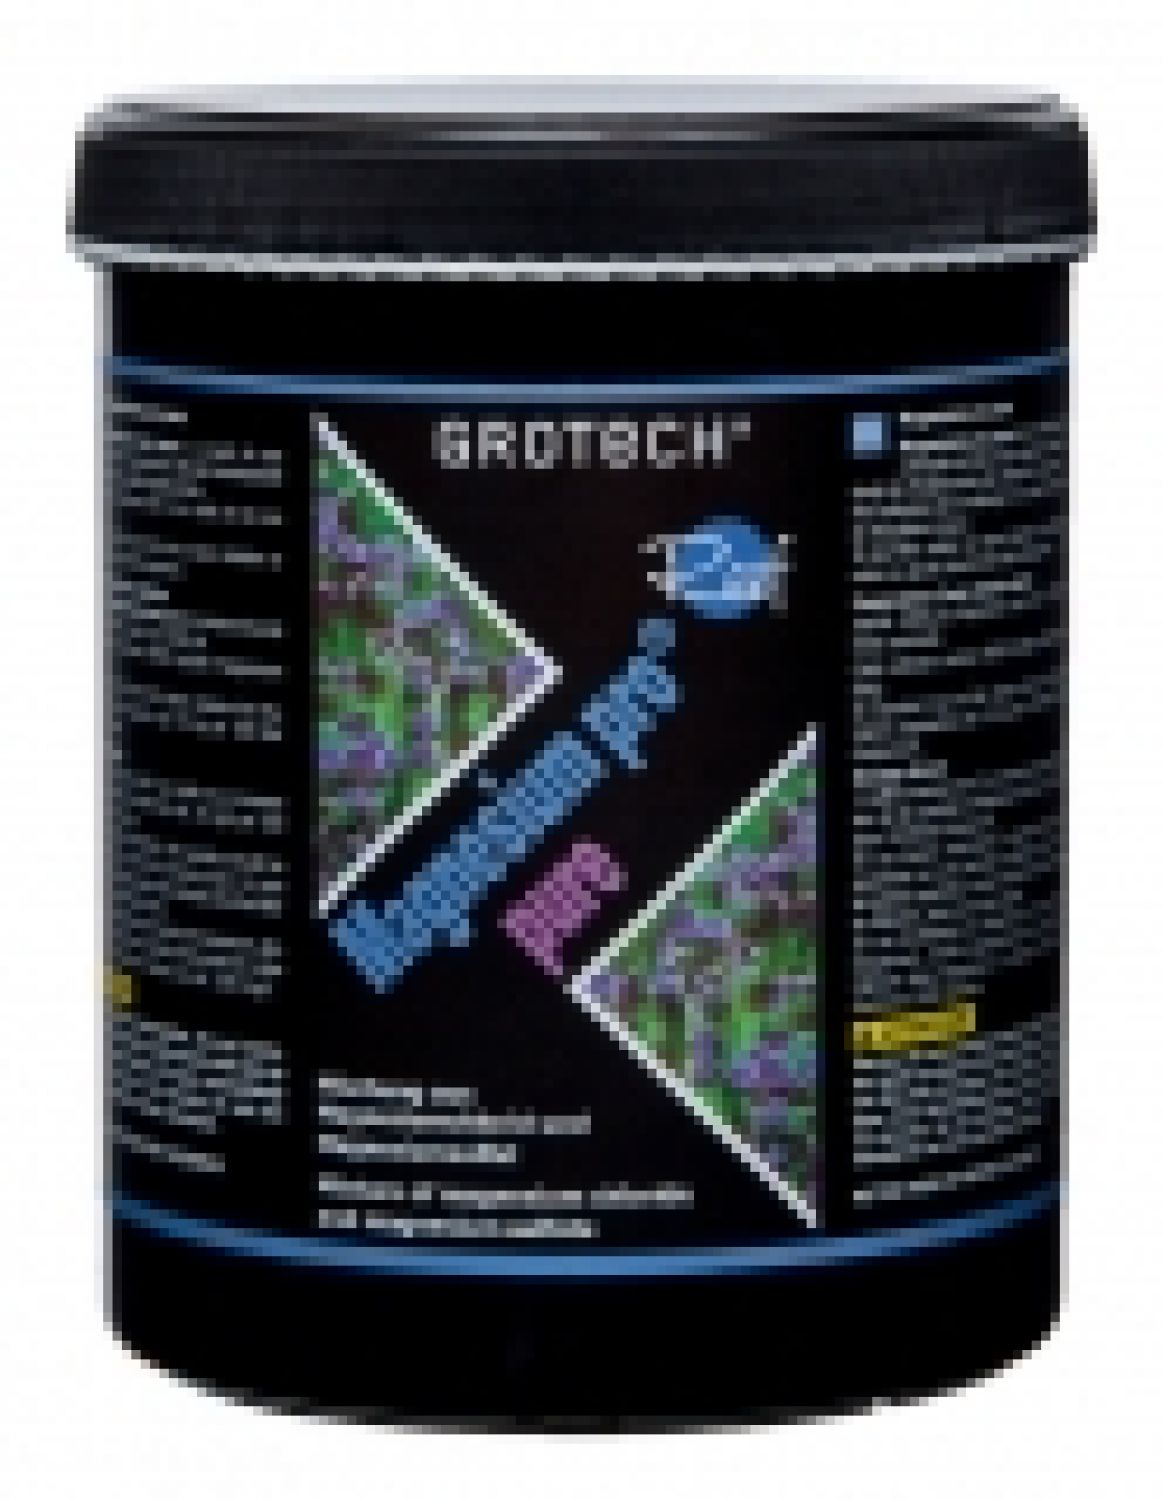 GroTech Magnesium pro pure - 1000 g-Dose